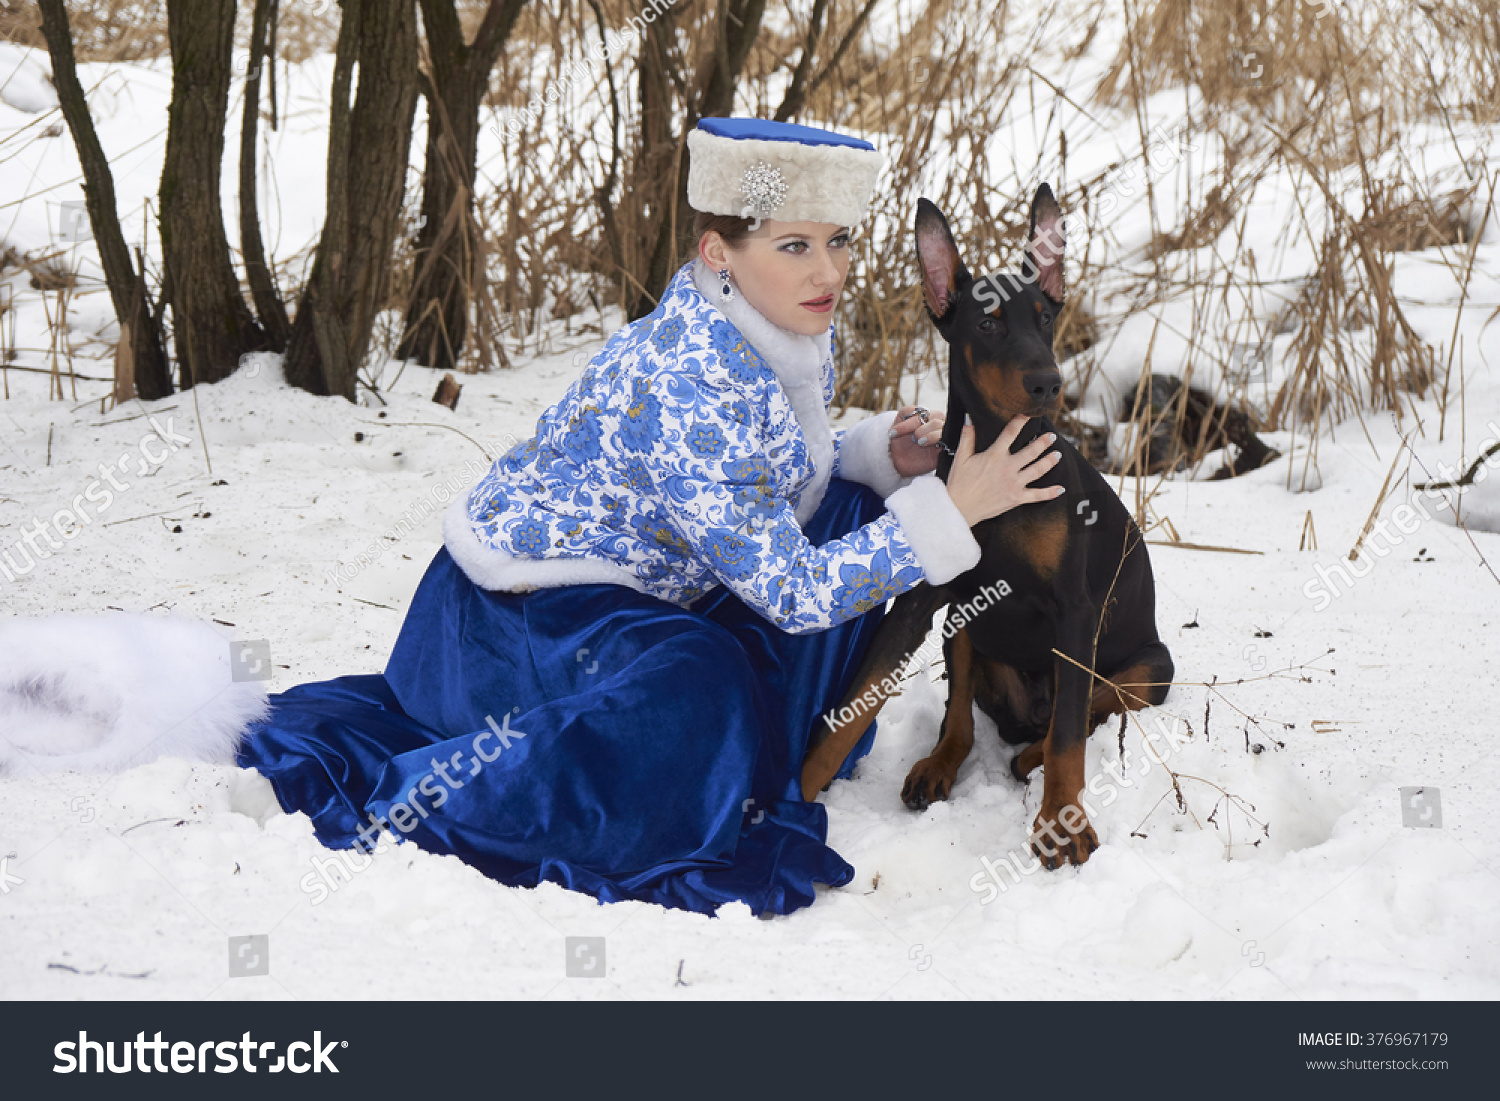 traditional winter clothing